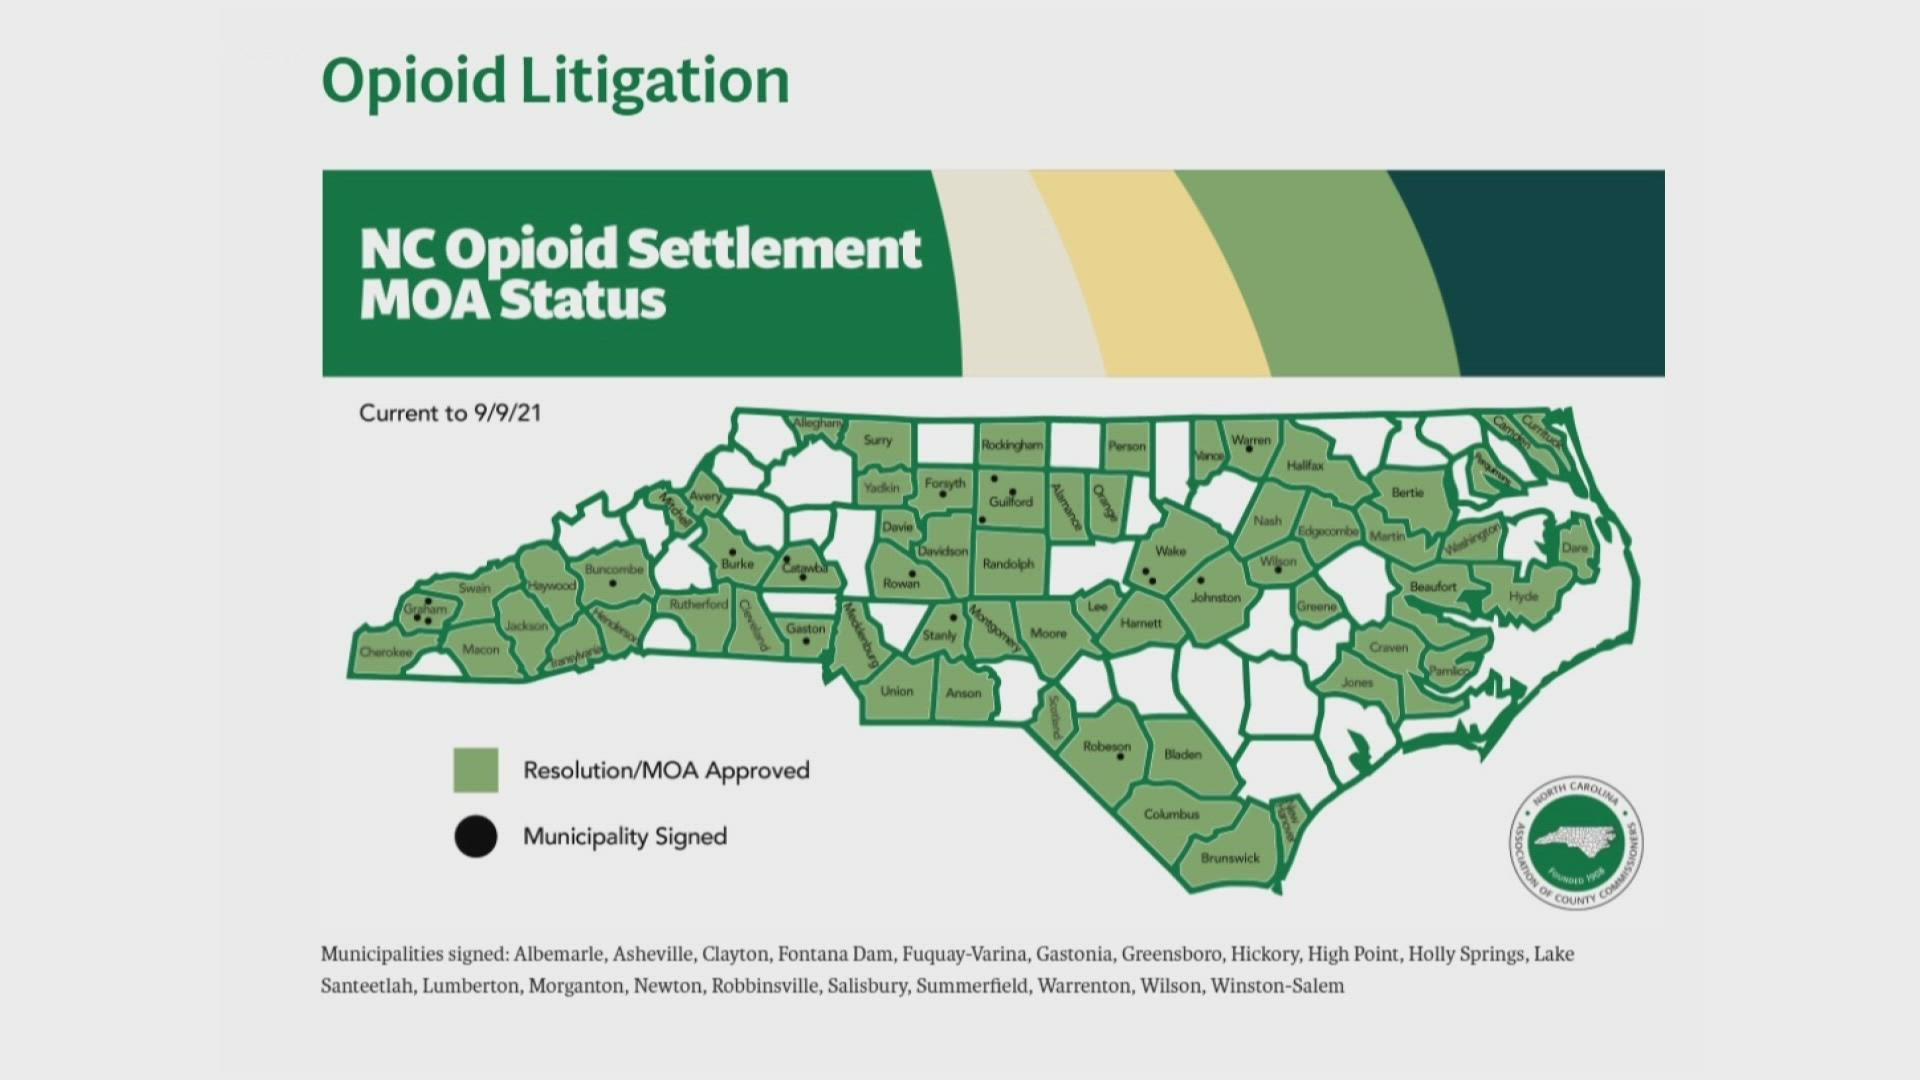 Forty-eight states and territories joined together for the second biggest opioid settlement in history: $26 billion.